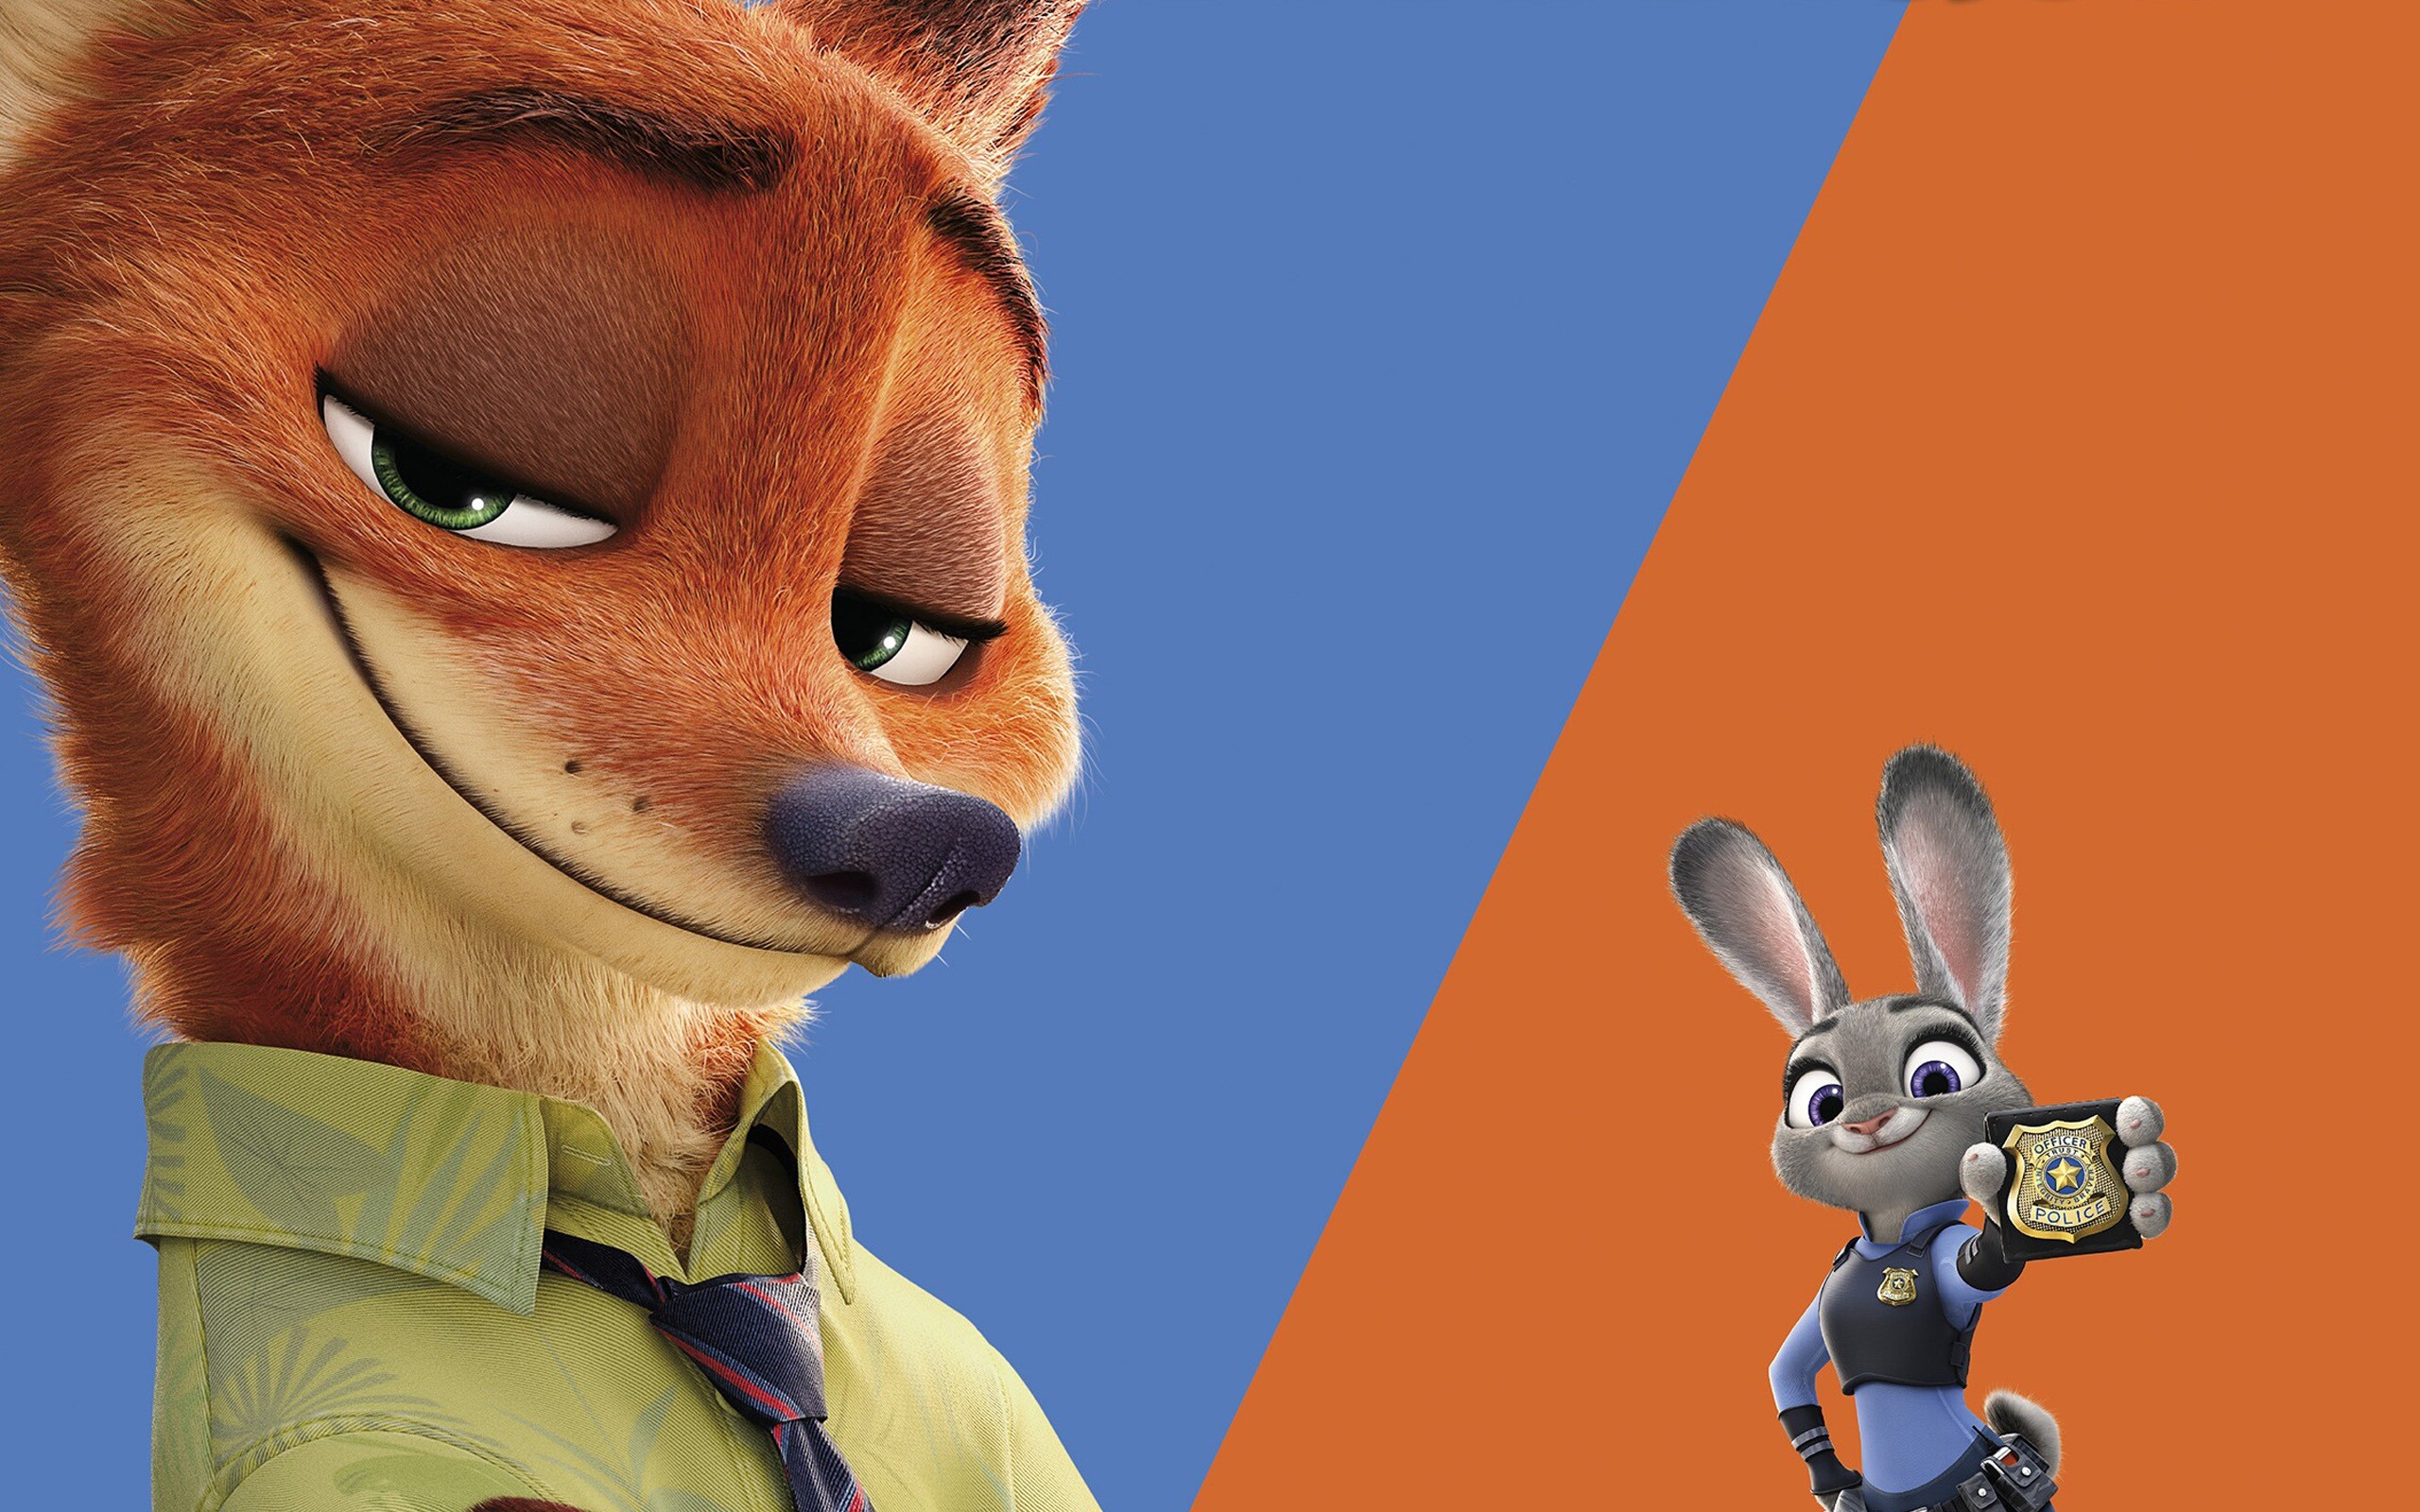 Zootopia: Received Best Animated Feature at the 89th Academy Awards. 2560x1600 HD Wallpaper.